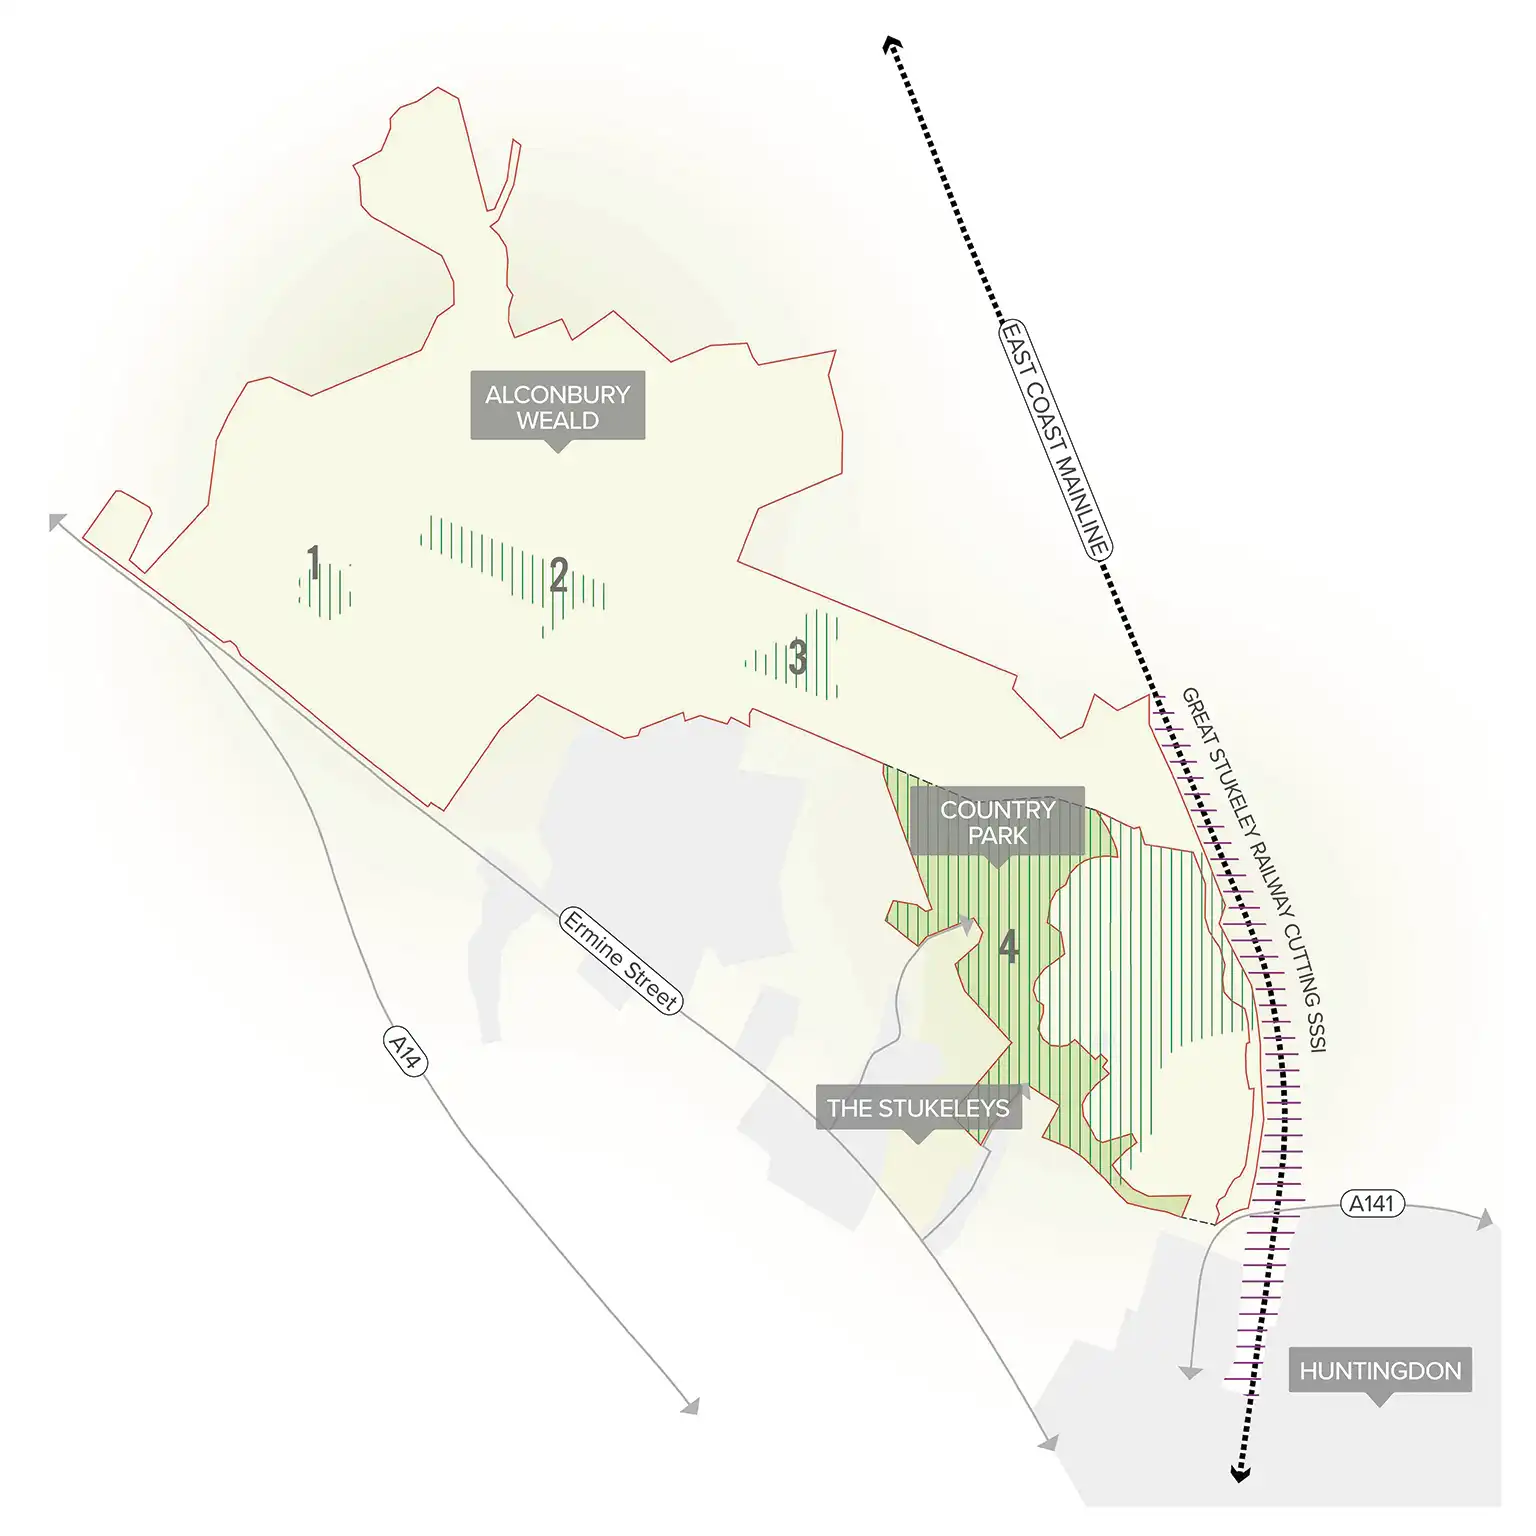 Map of Alconbury Weald showing the four strategic green spaces.